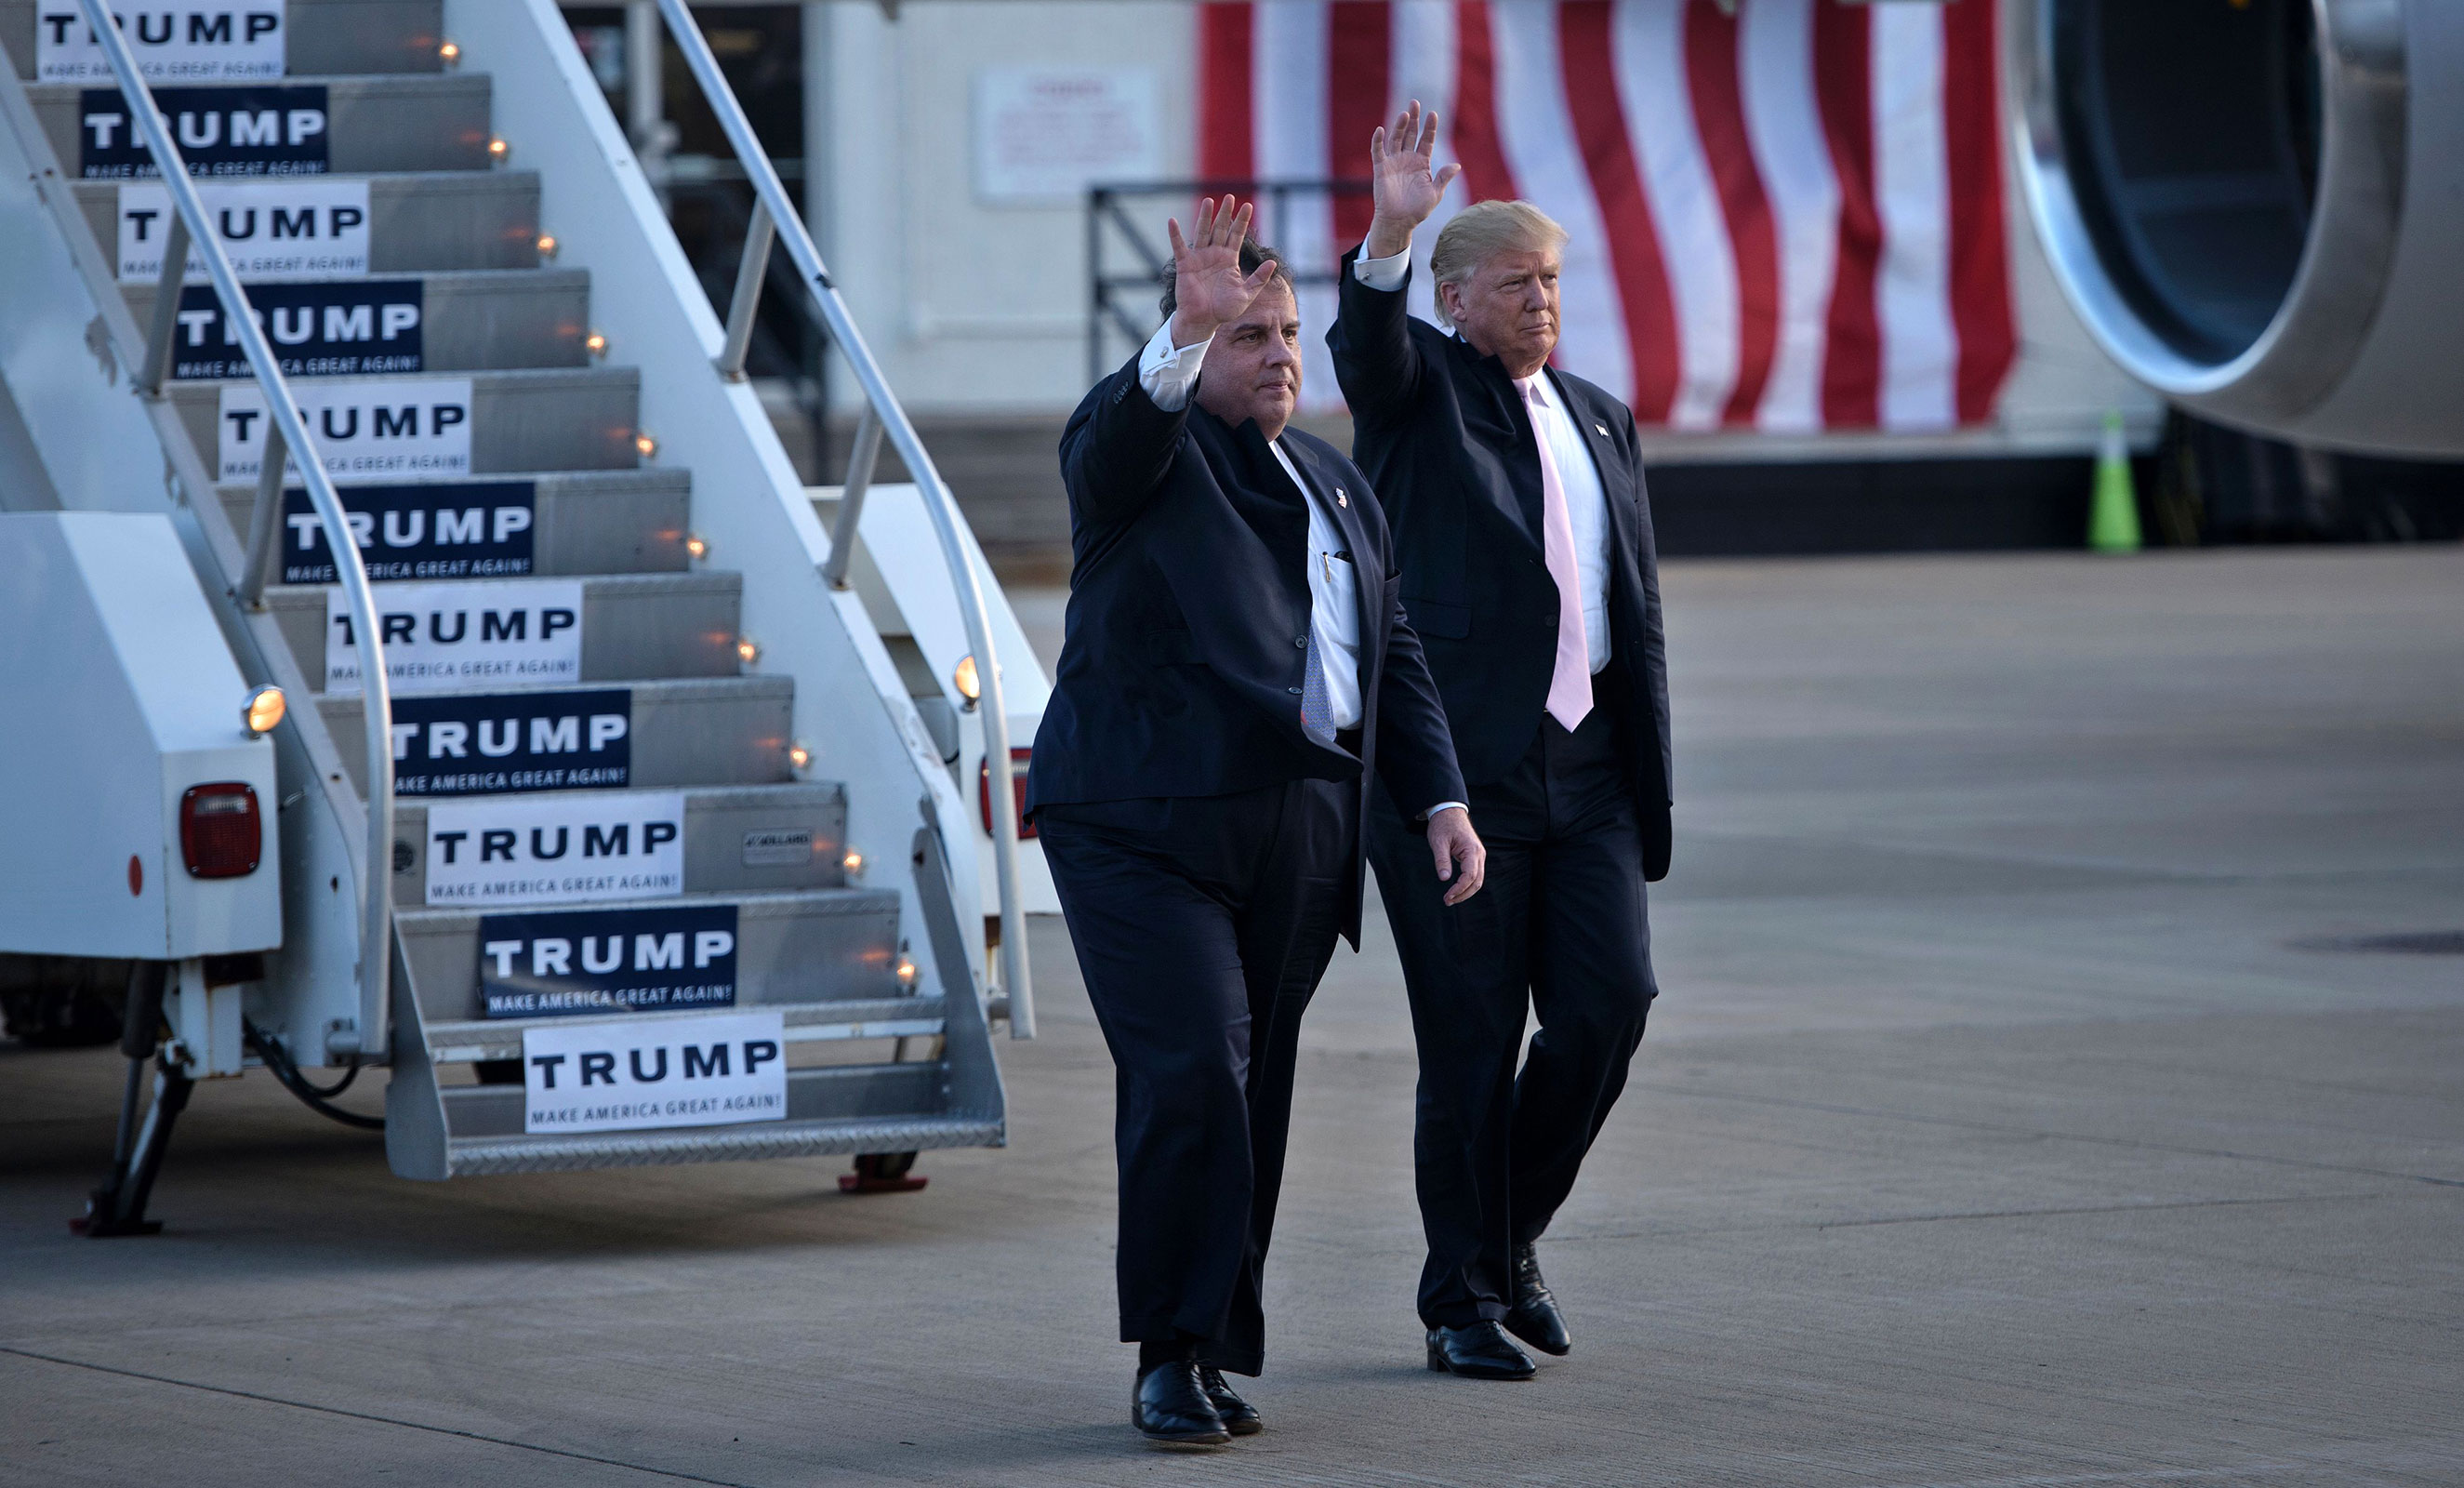 In this 2016 photo, Republican presidential hopeful Donald Trump arrives with New Jersey Governor Chris Christie for a rally March 14, 2016 in Vienna Center, Ohio.